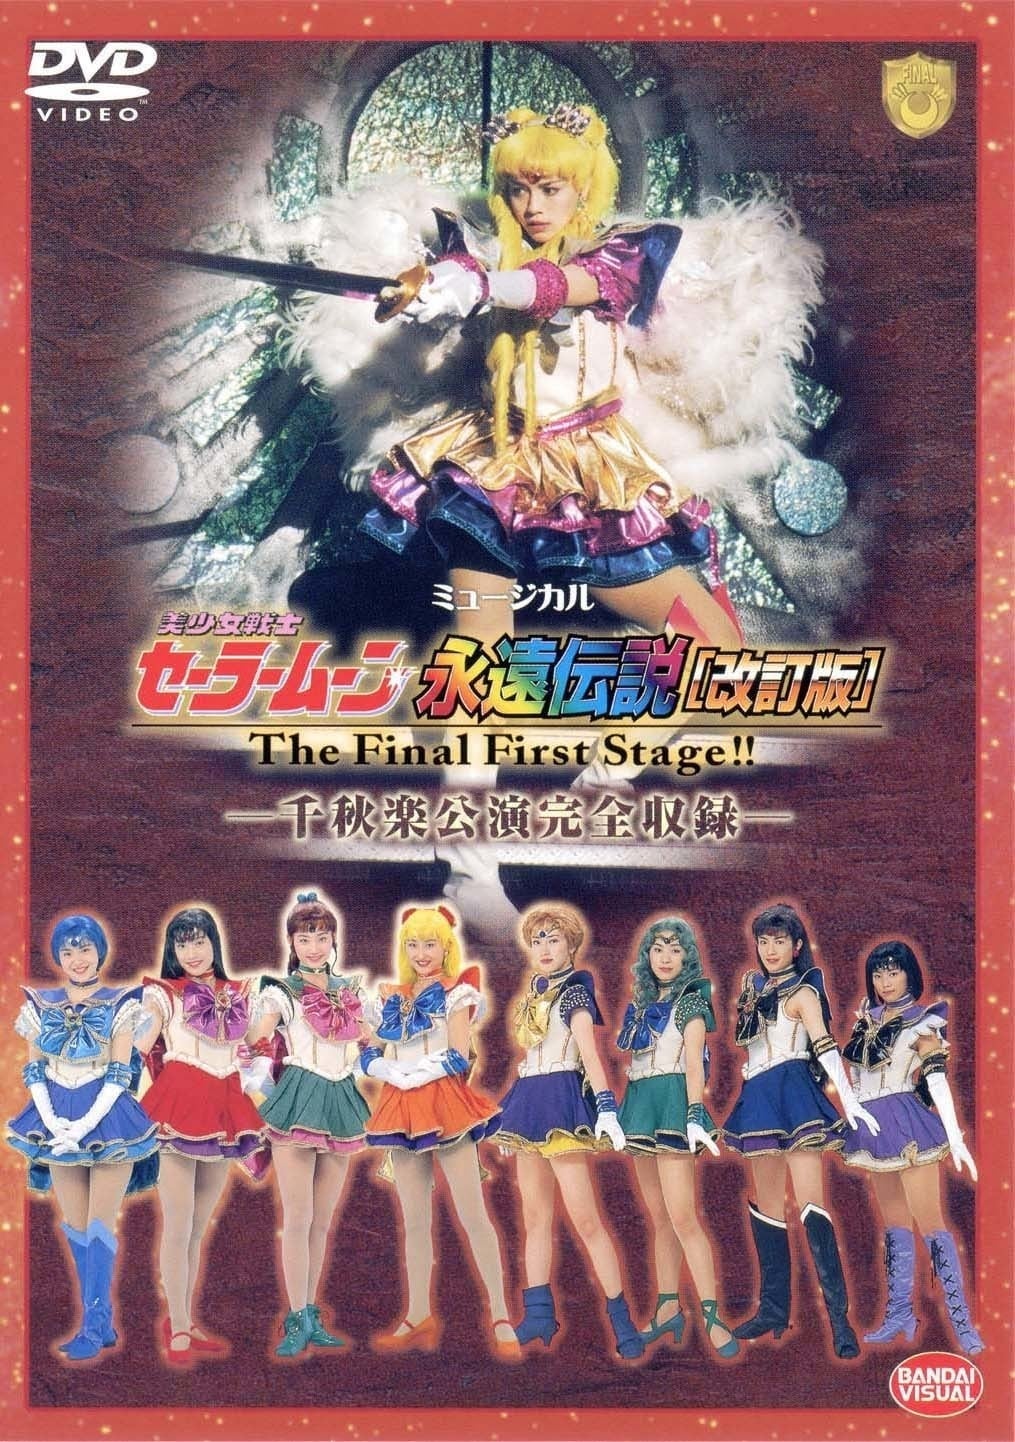 Sailor Moon - The Eternal Legend (Revision) - The Final First Stage - Last Day Performance